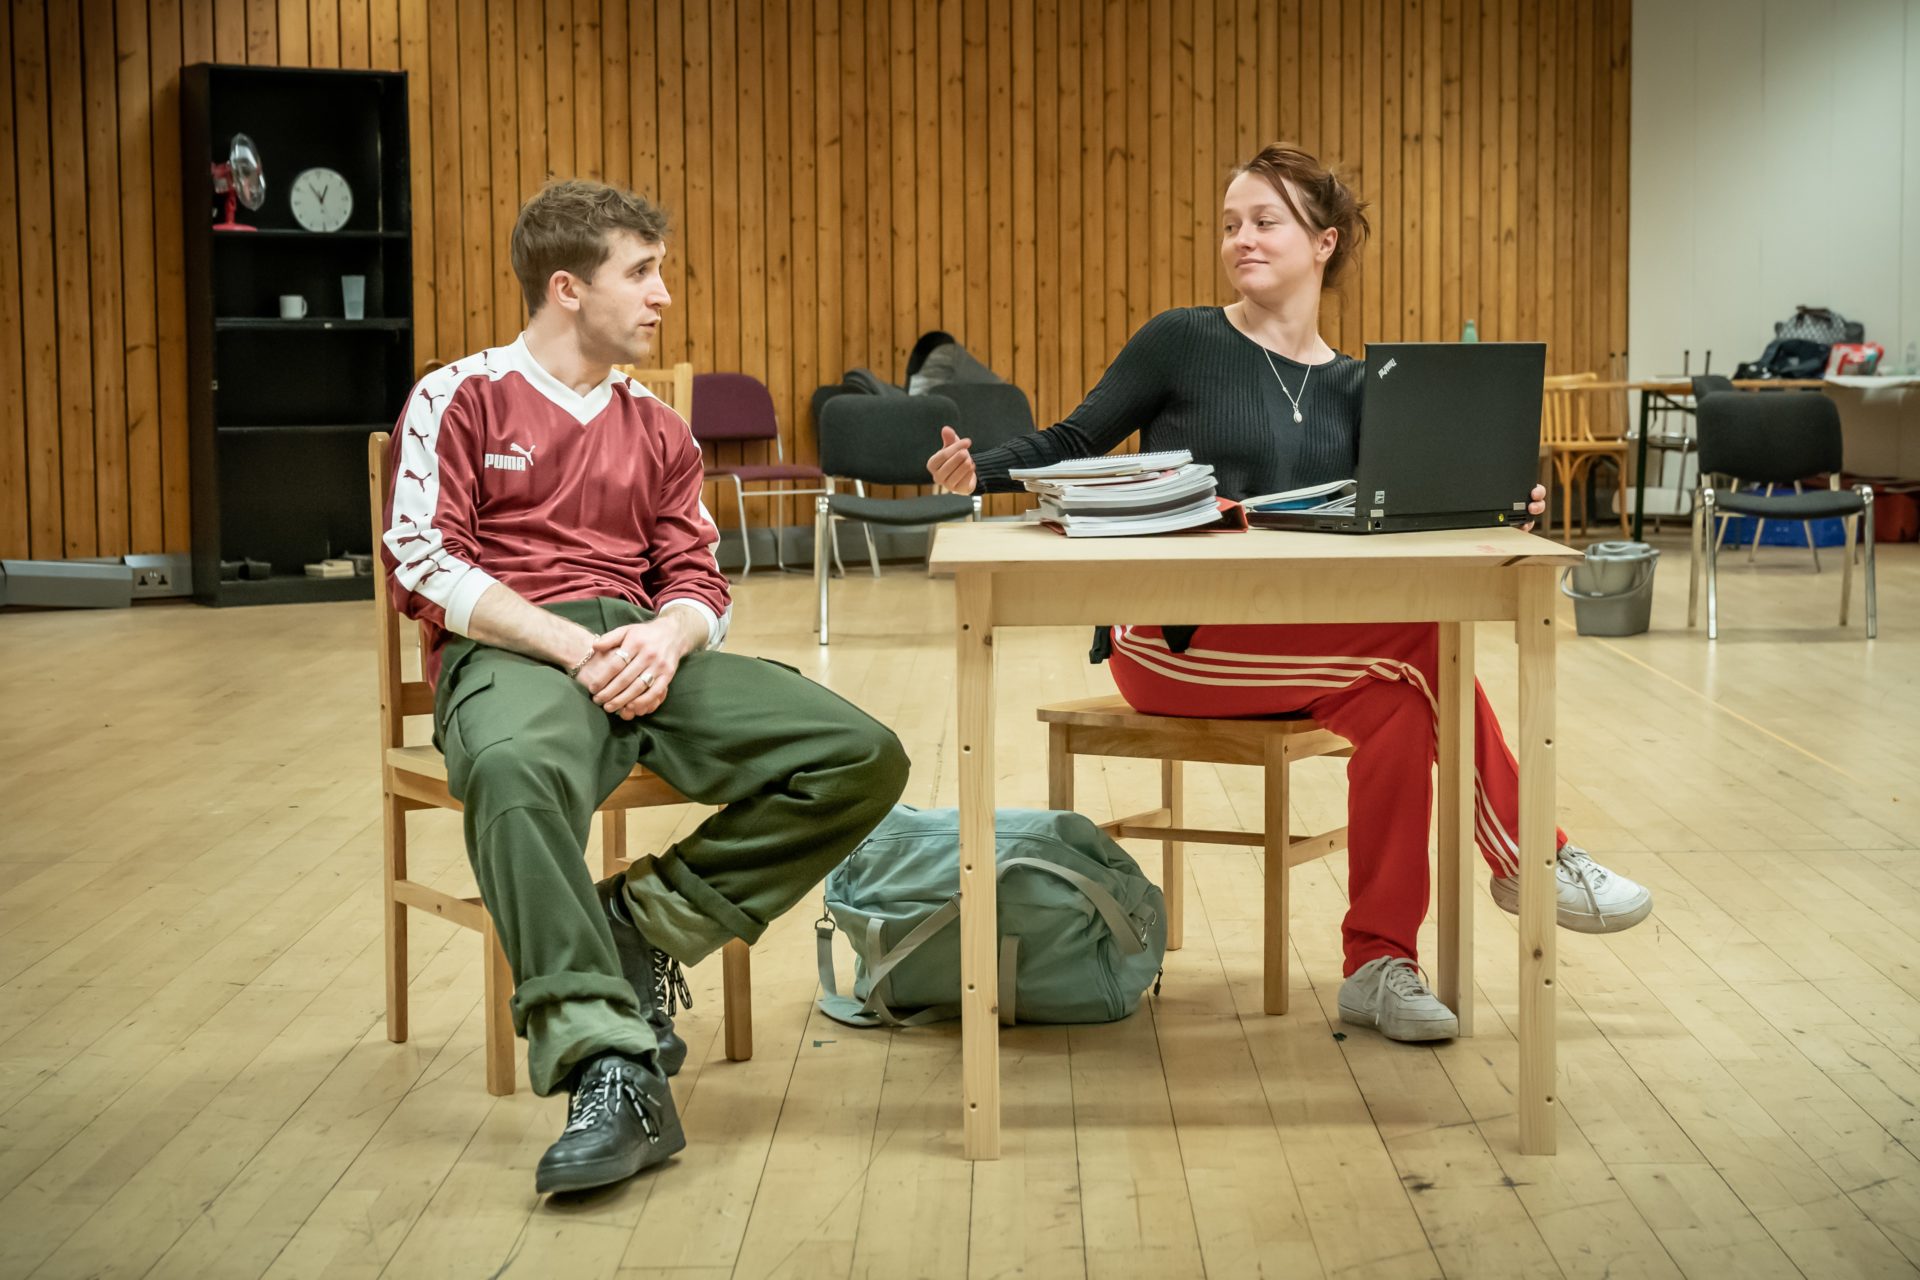 Callum Scott Howells (Romeo) and Rosie Sheehy (Julie) at the National Theatre (c) Marc Brenner